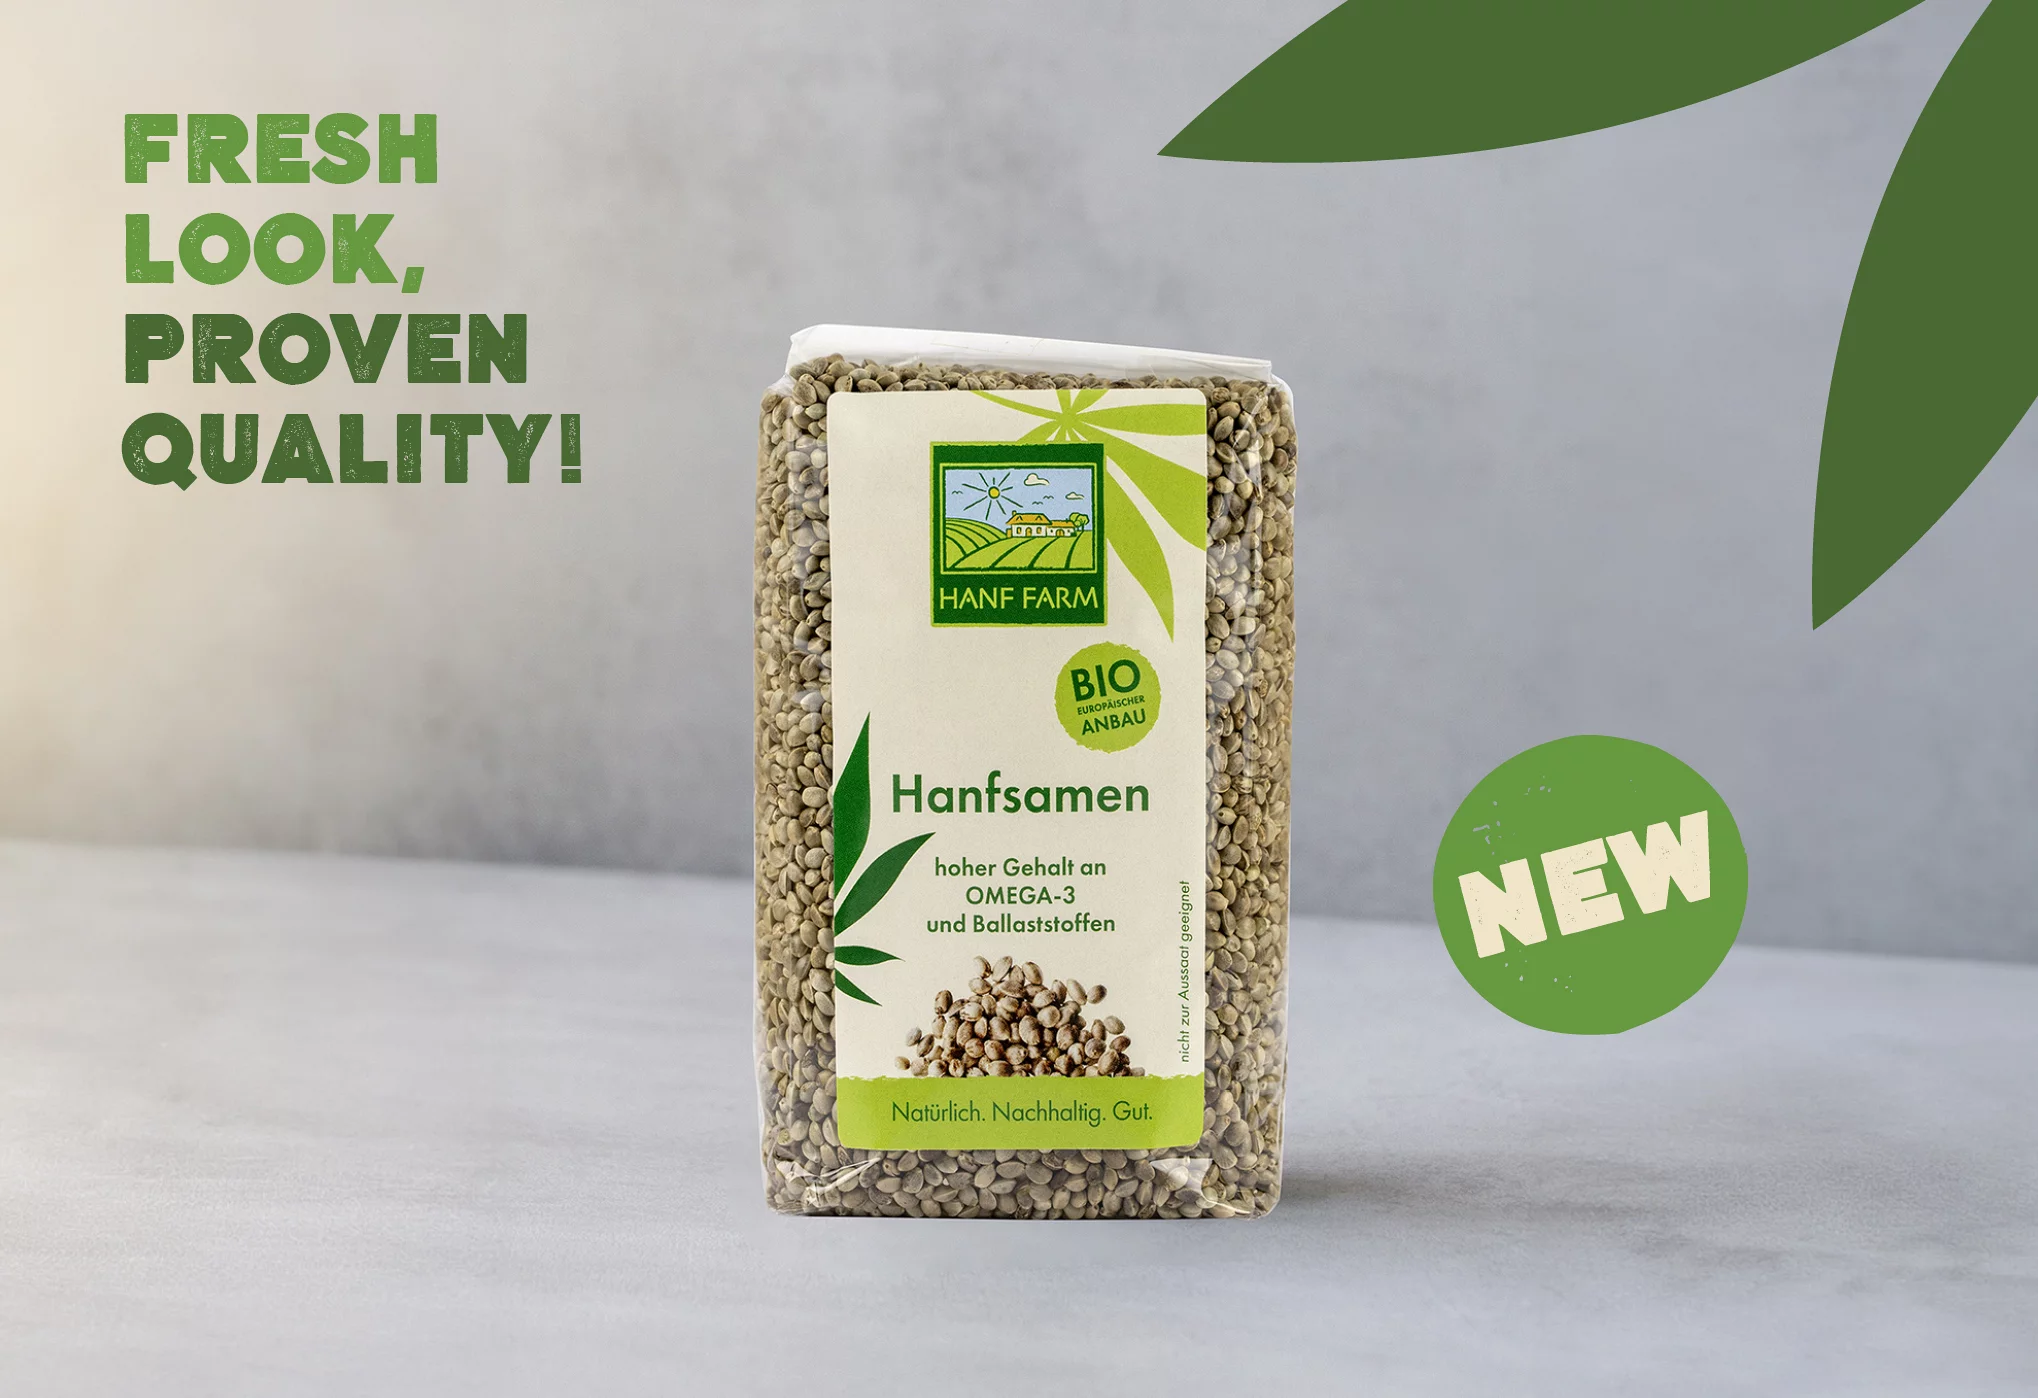 Now available with a new design!
Our organic hemp seeds are rich in polyunsaturated fatty acids with a balanced omega-6 to omega-3 ratio (3:1), ideal for a healthy diet. When lightly roasted, the hemp seeds develop their nutty flavour and offer a unique crunch effect.